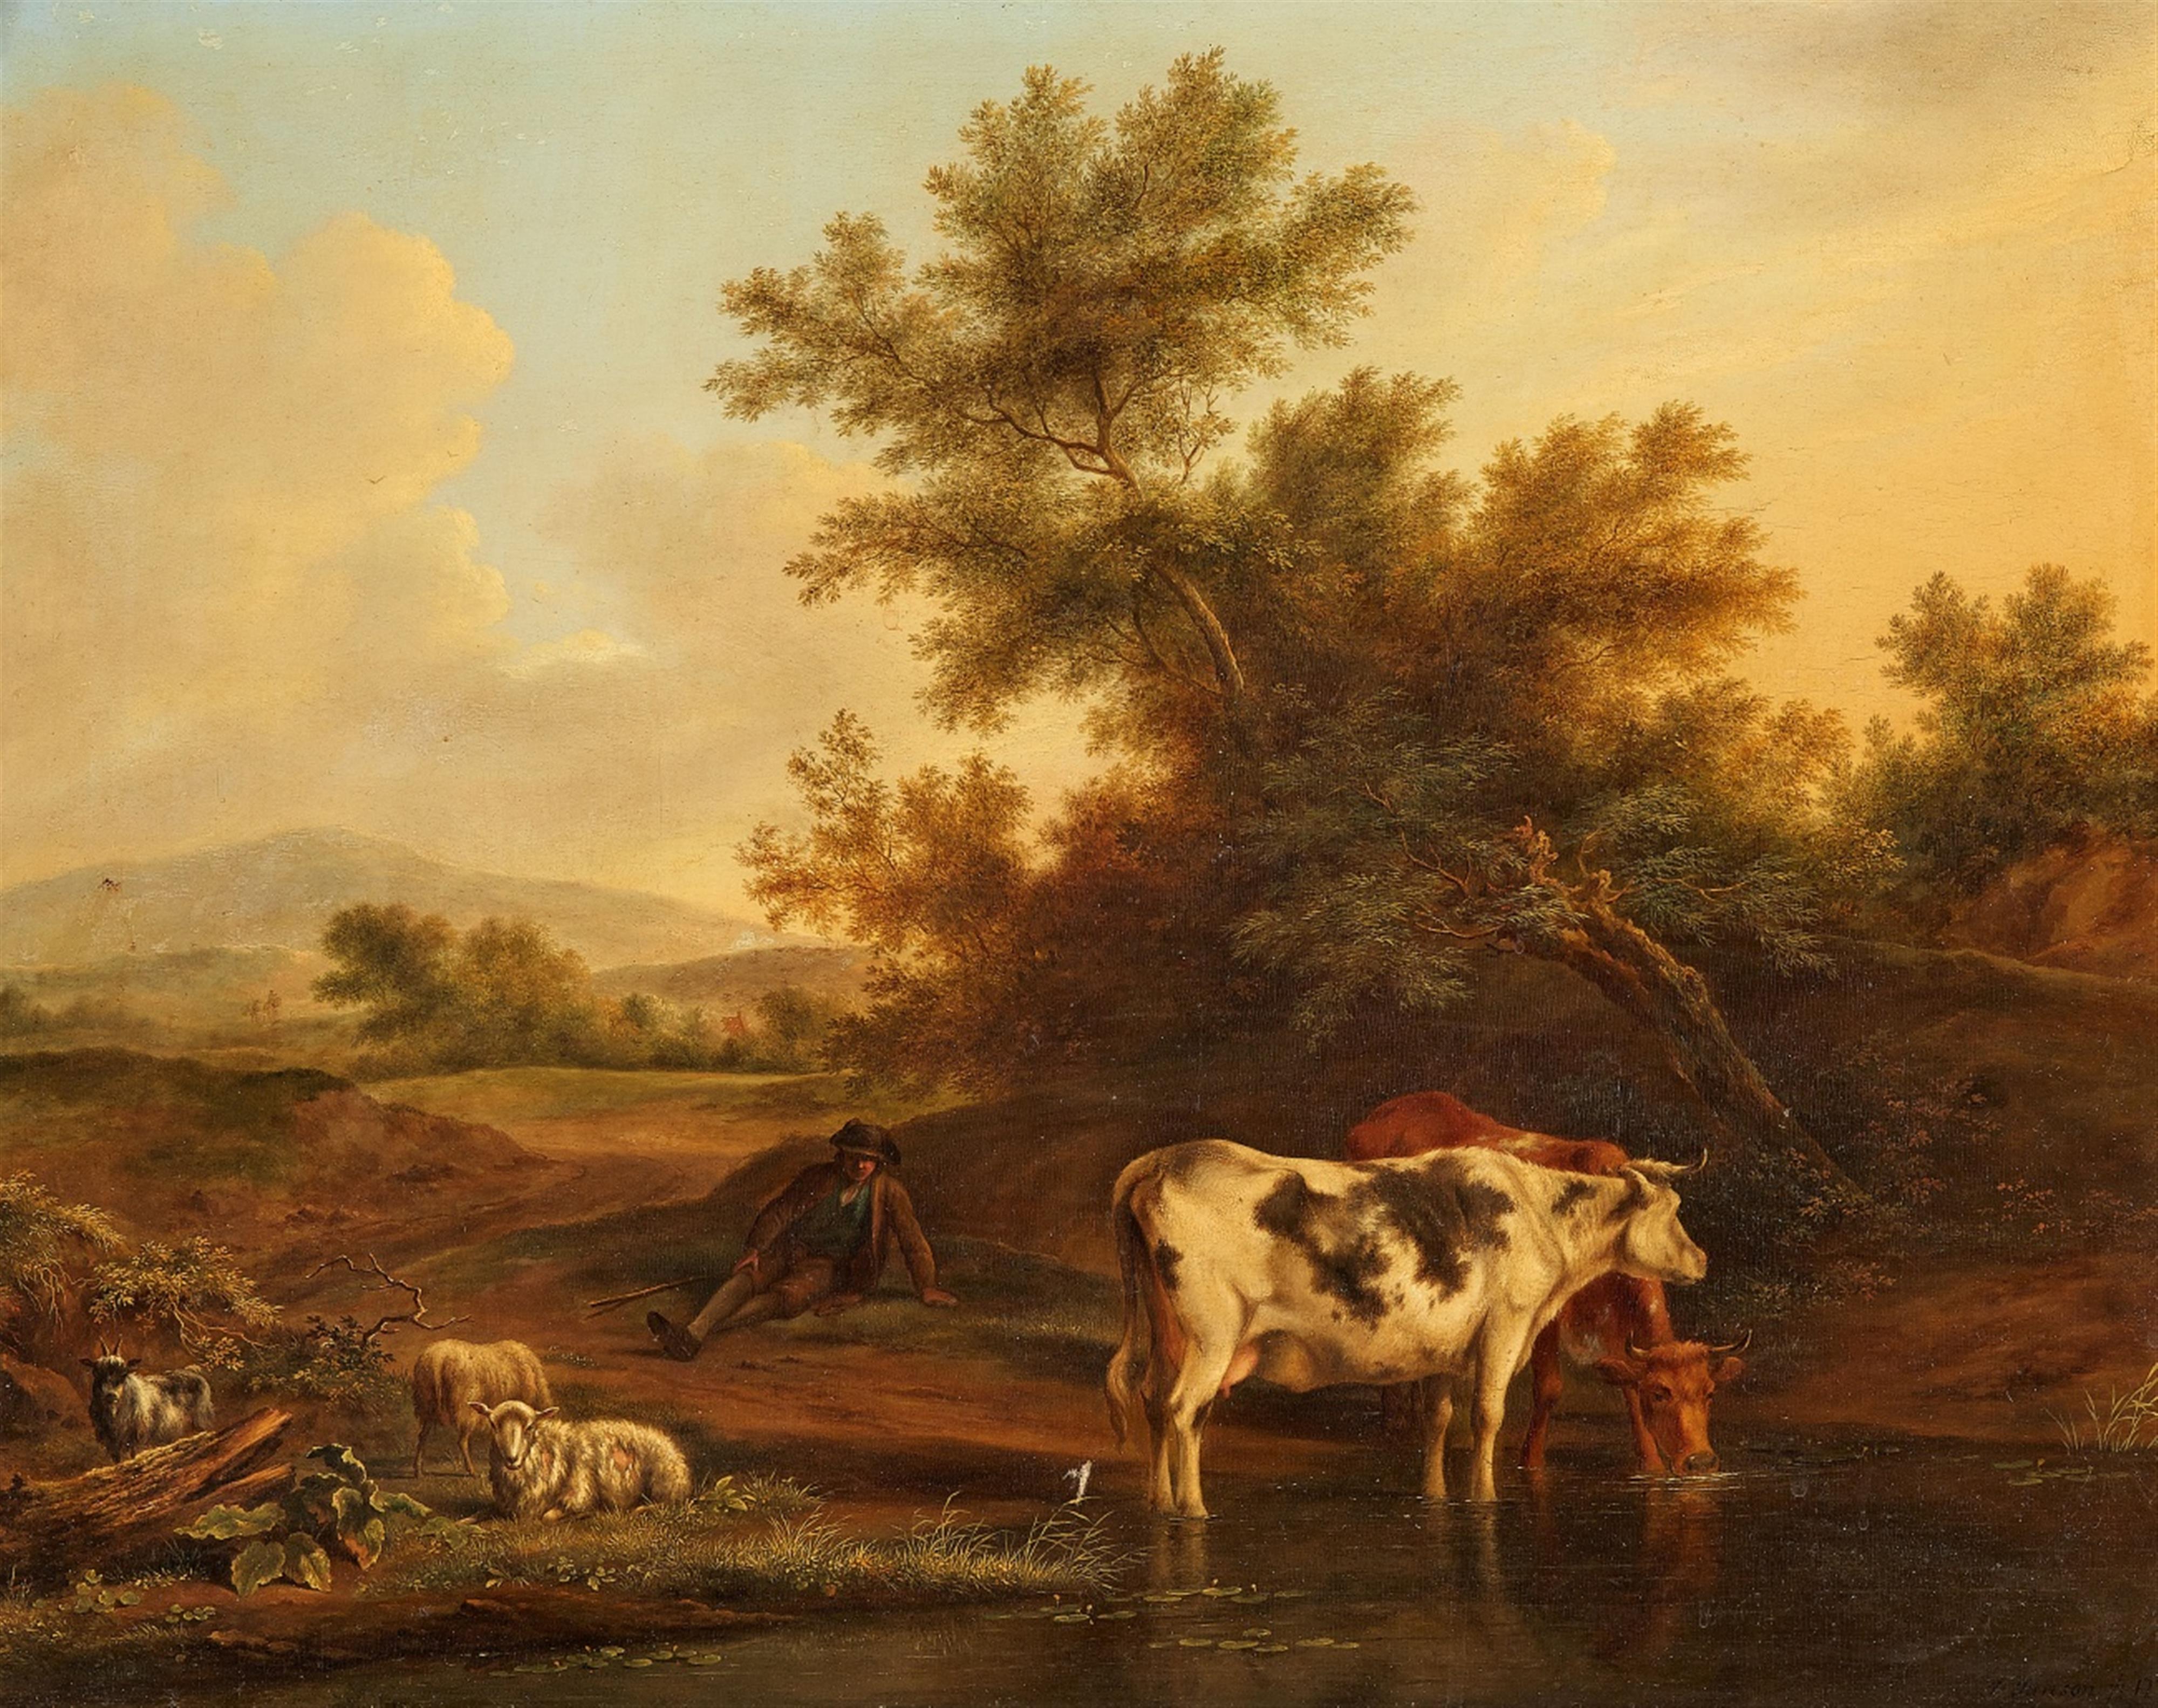 JOHANNES JANSON - Landscape with a Shepherd, Cows, Sheep and Goats - image-1